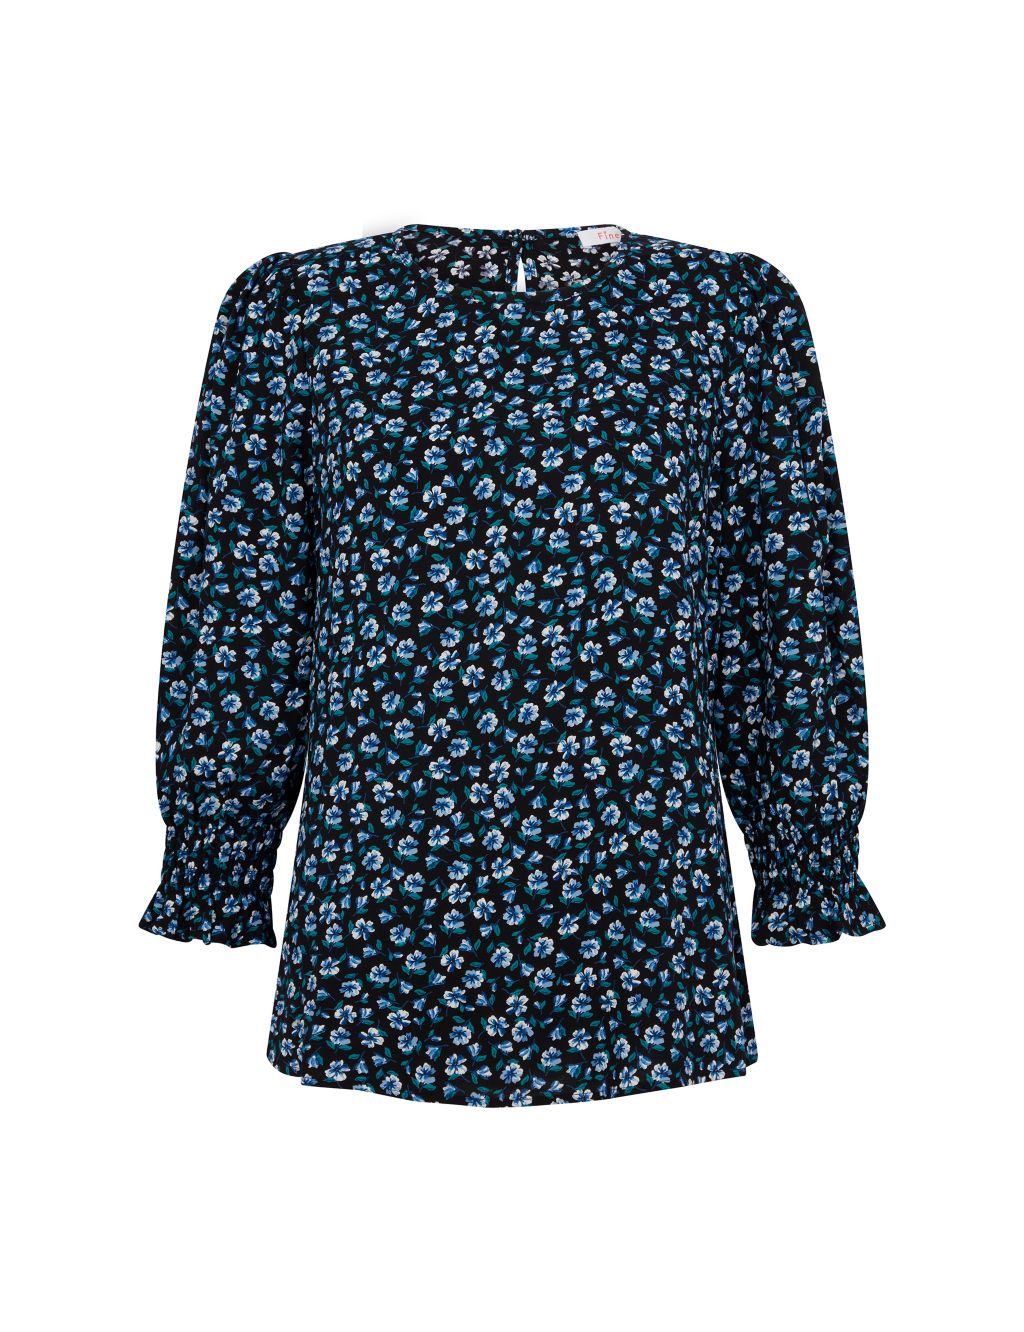 Ditsy Floral Round Neck Puff Sleeve Blouse | Finery London | M&S